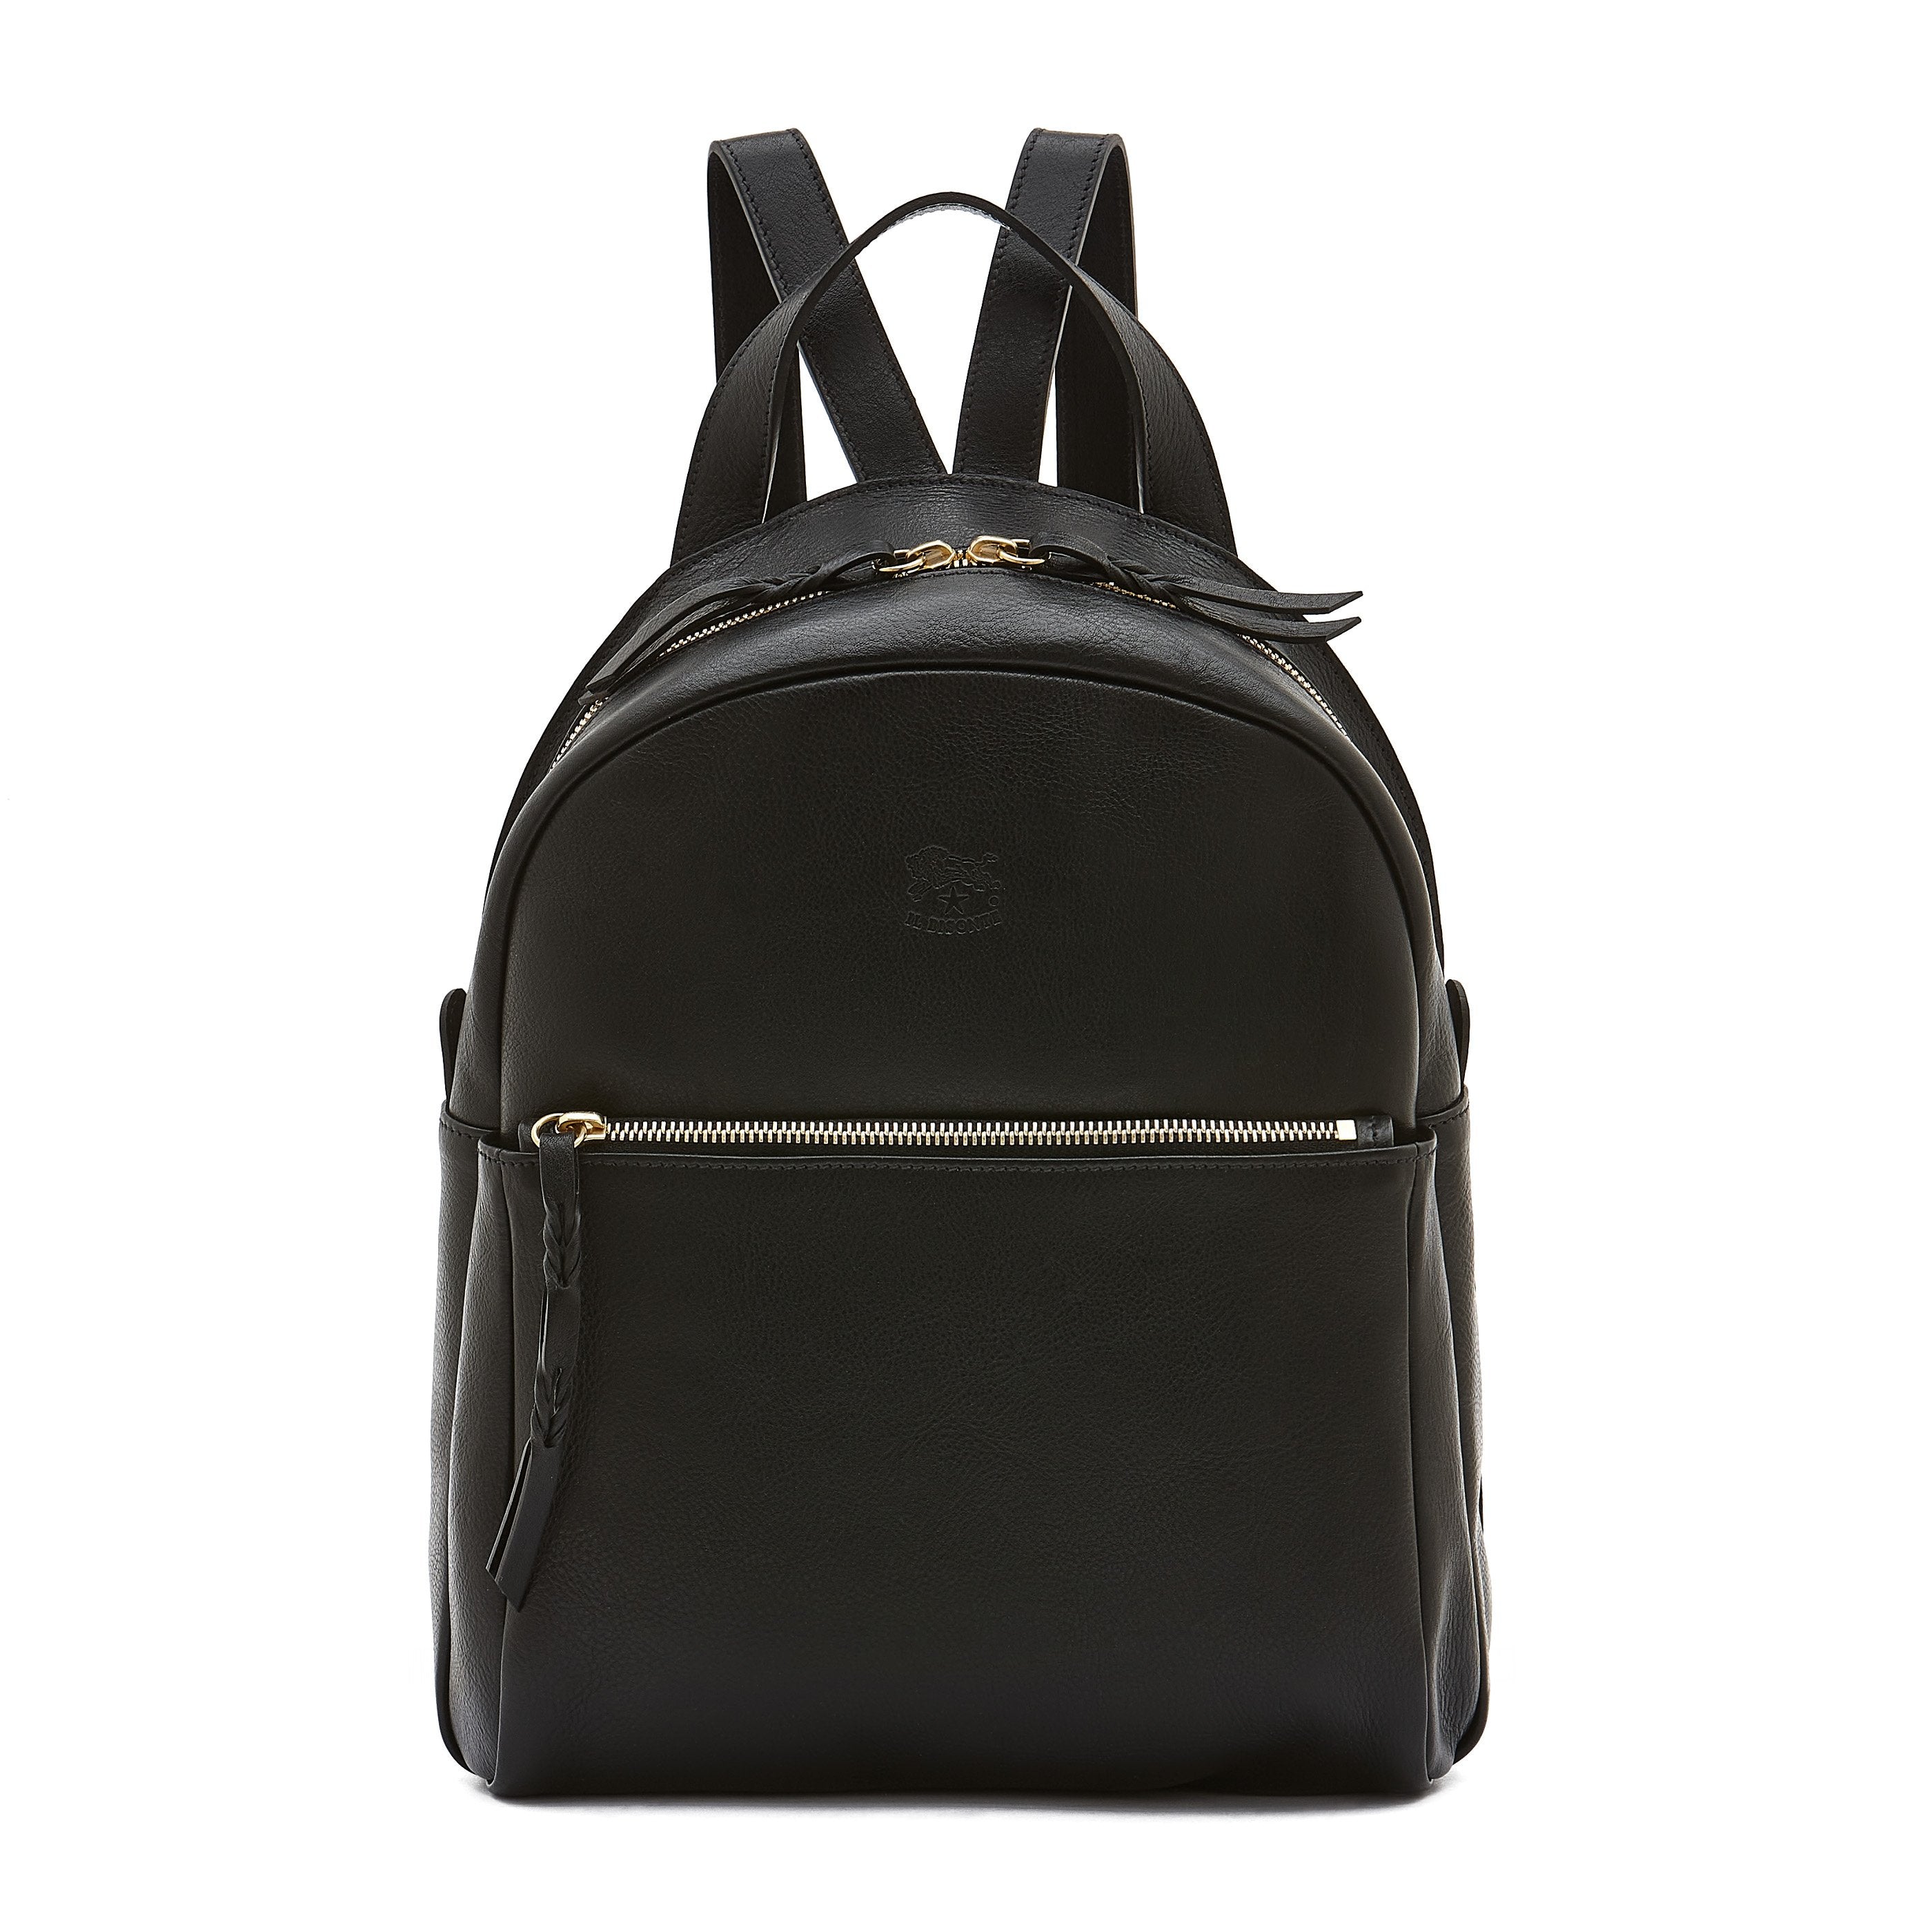 Lungarno | Women's backpack in leather color black – Il Bisonte